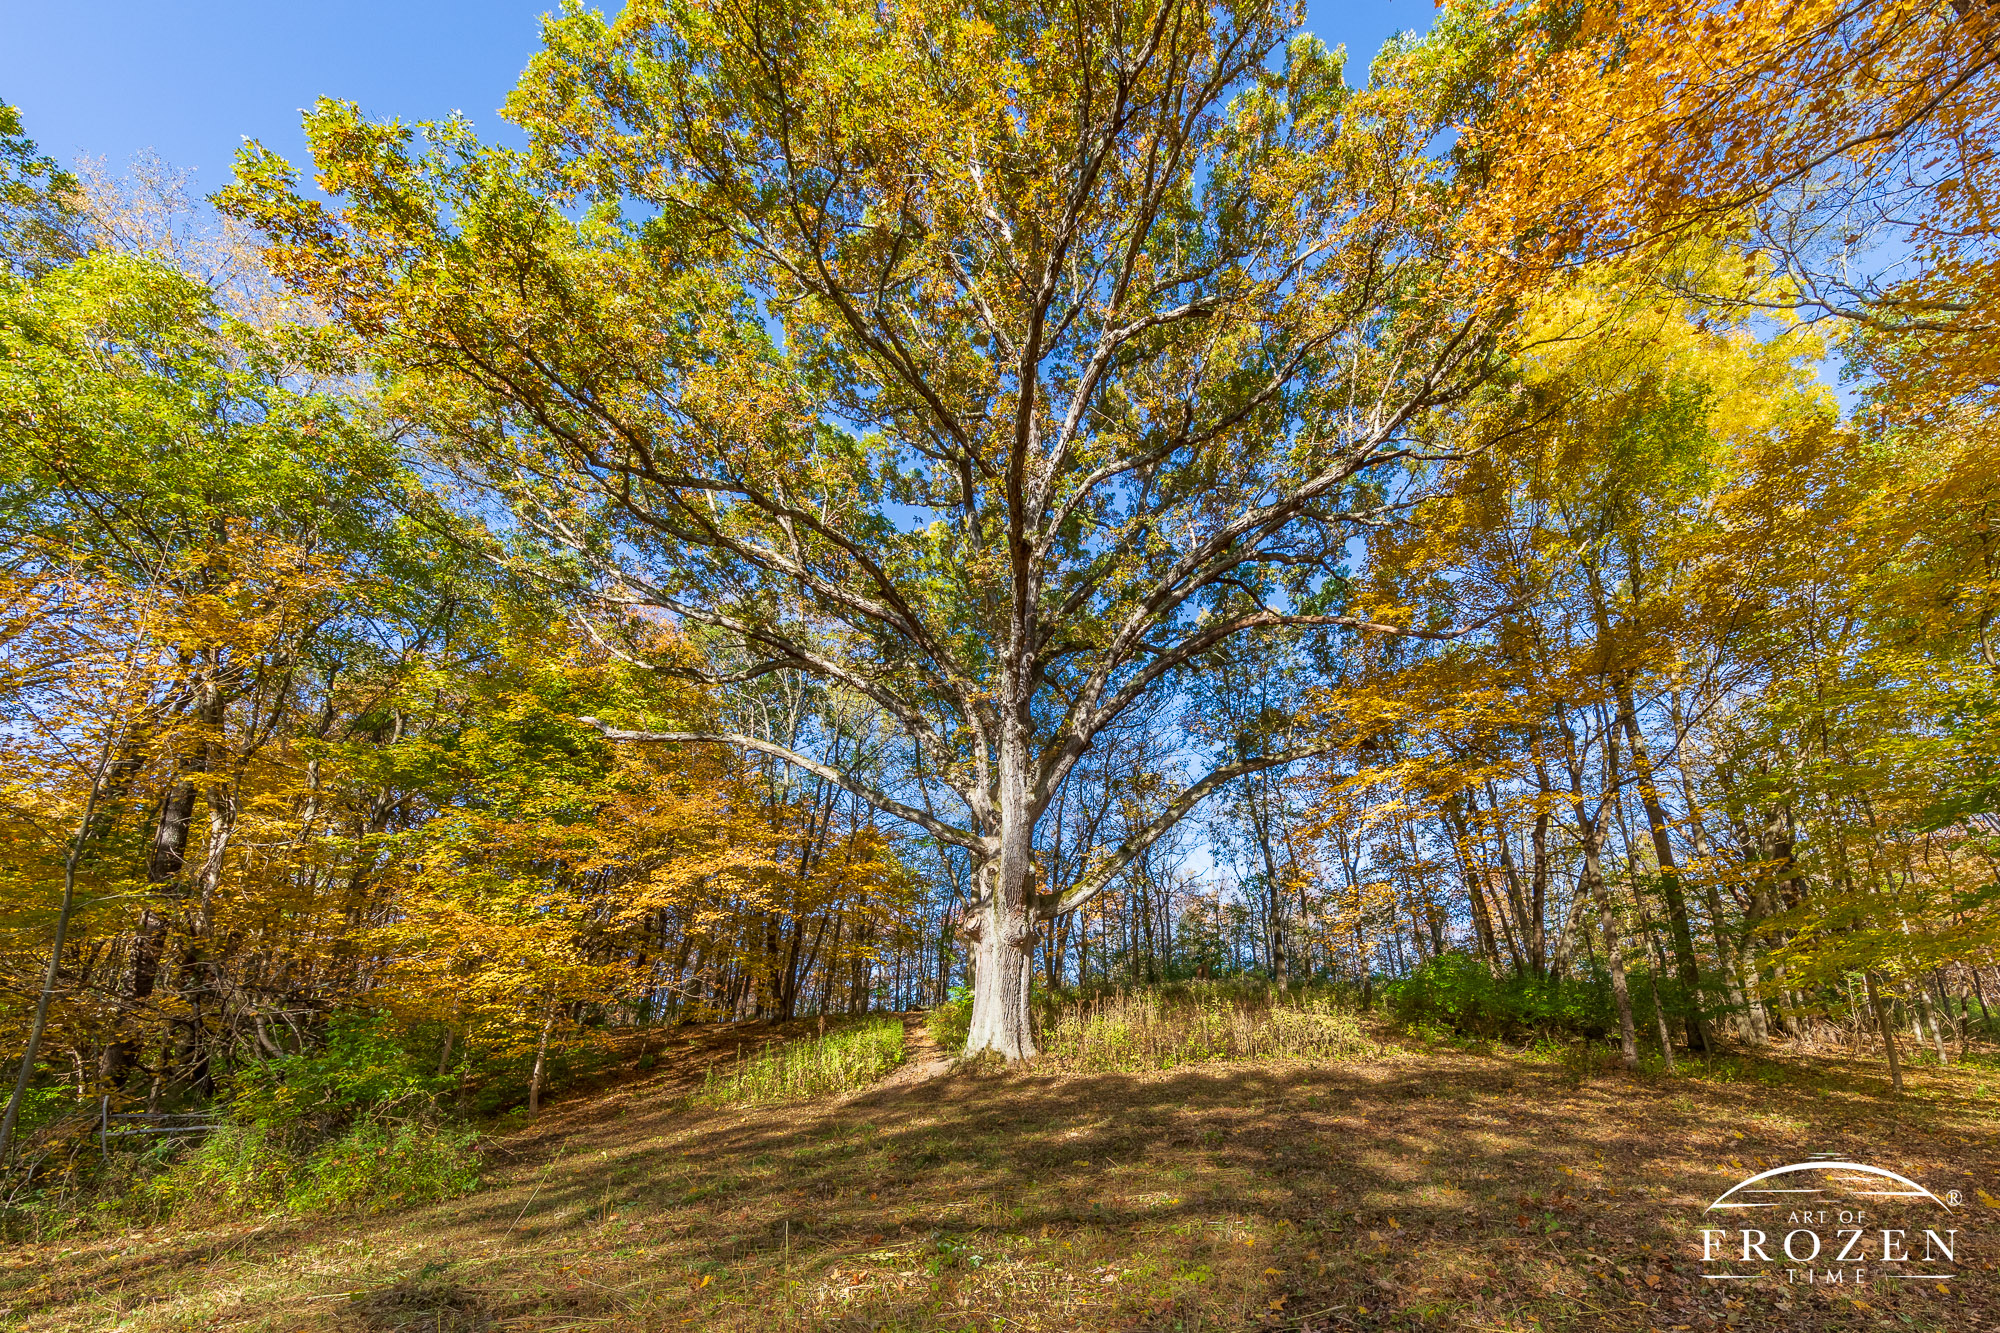 One of Ohio’s largest white oak trees whose branches spread out in all directions as the autumn-colored leaves compliment the blue sky above.